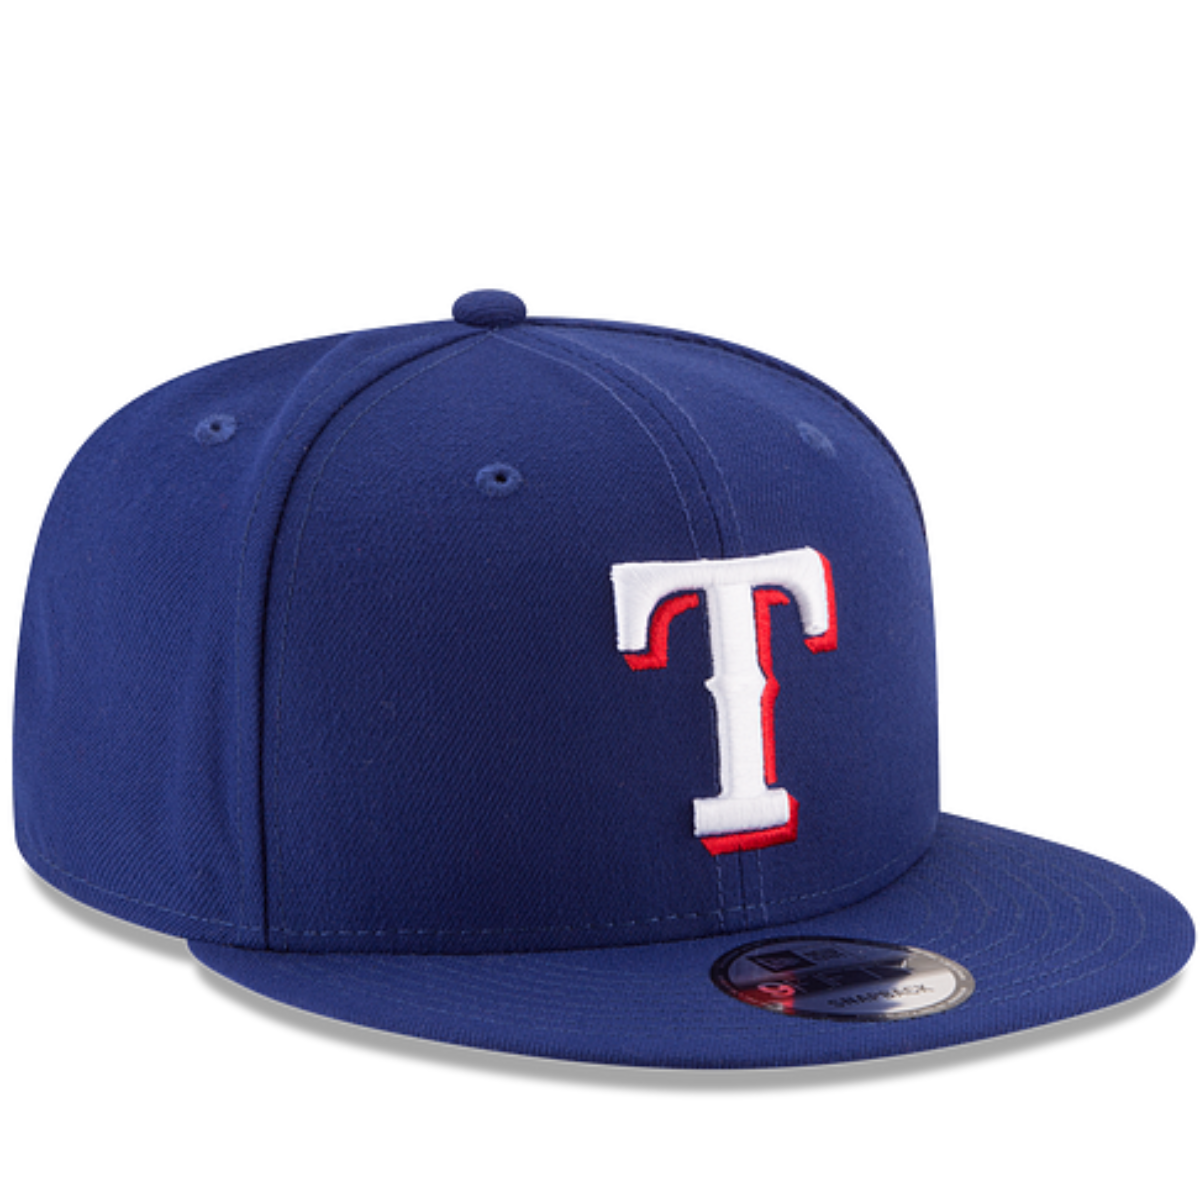 TEXAS RANGERS NEW ERA ON FIELD BASIC COLLECTION SNAPBACK 9FIFTY-BLUE NVSOCCER.COM THE COLISEUM 